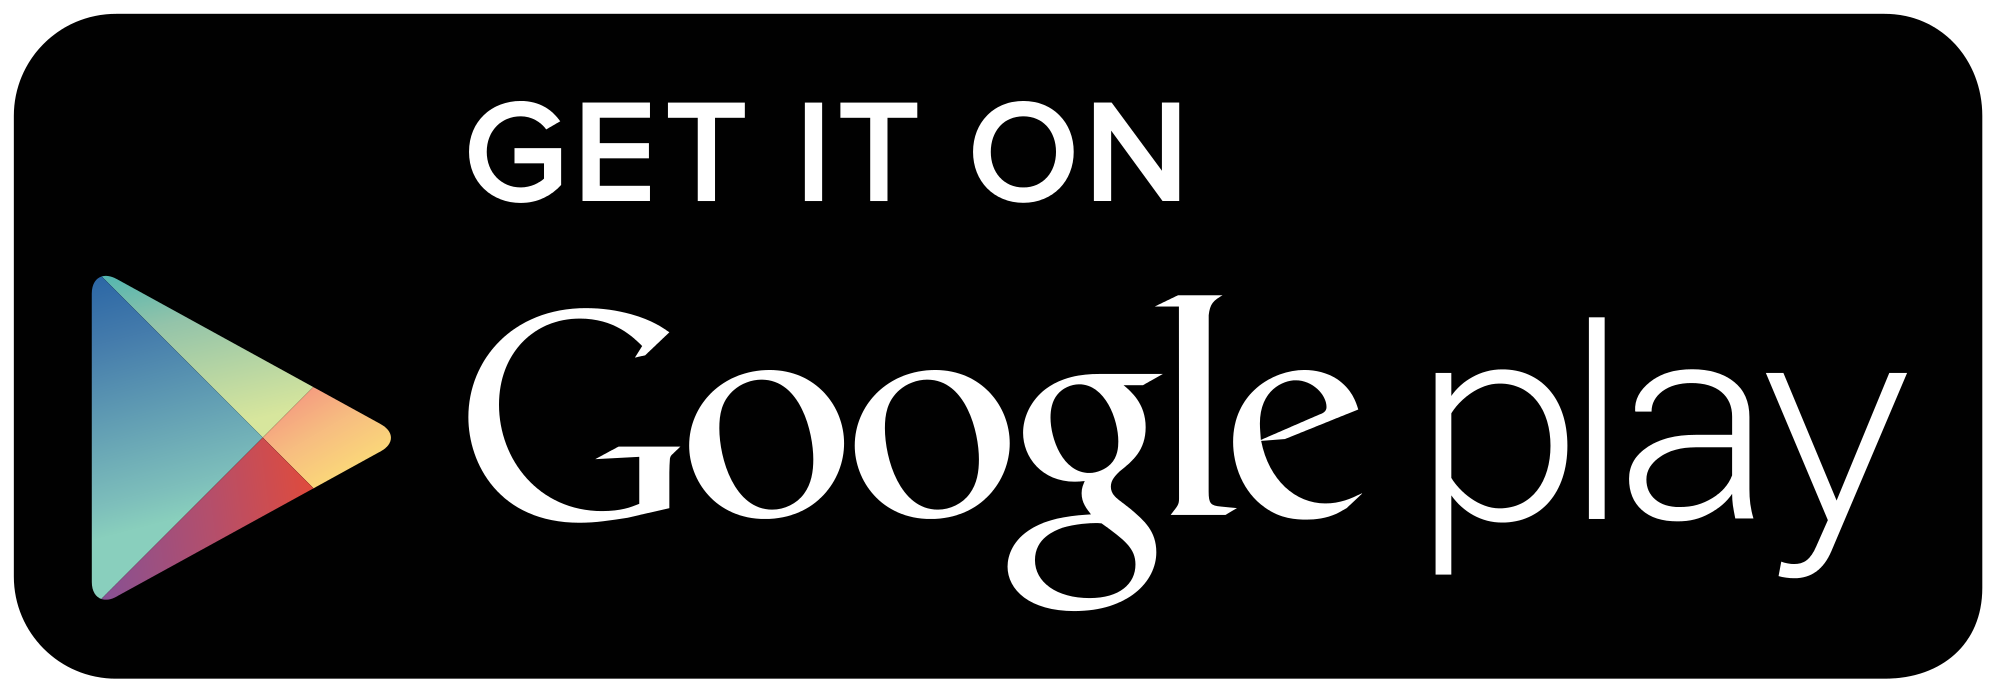 2000px-Get_it_on_Google_play.svg_